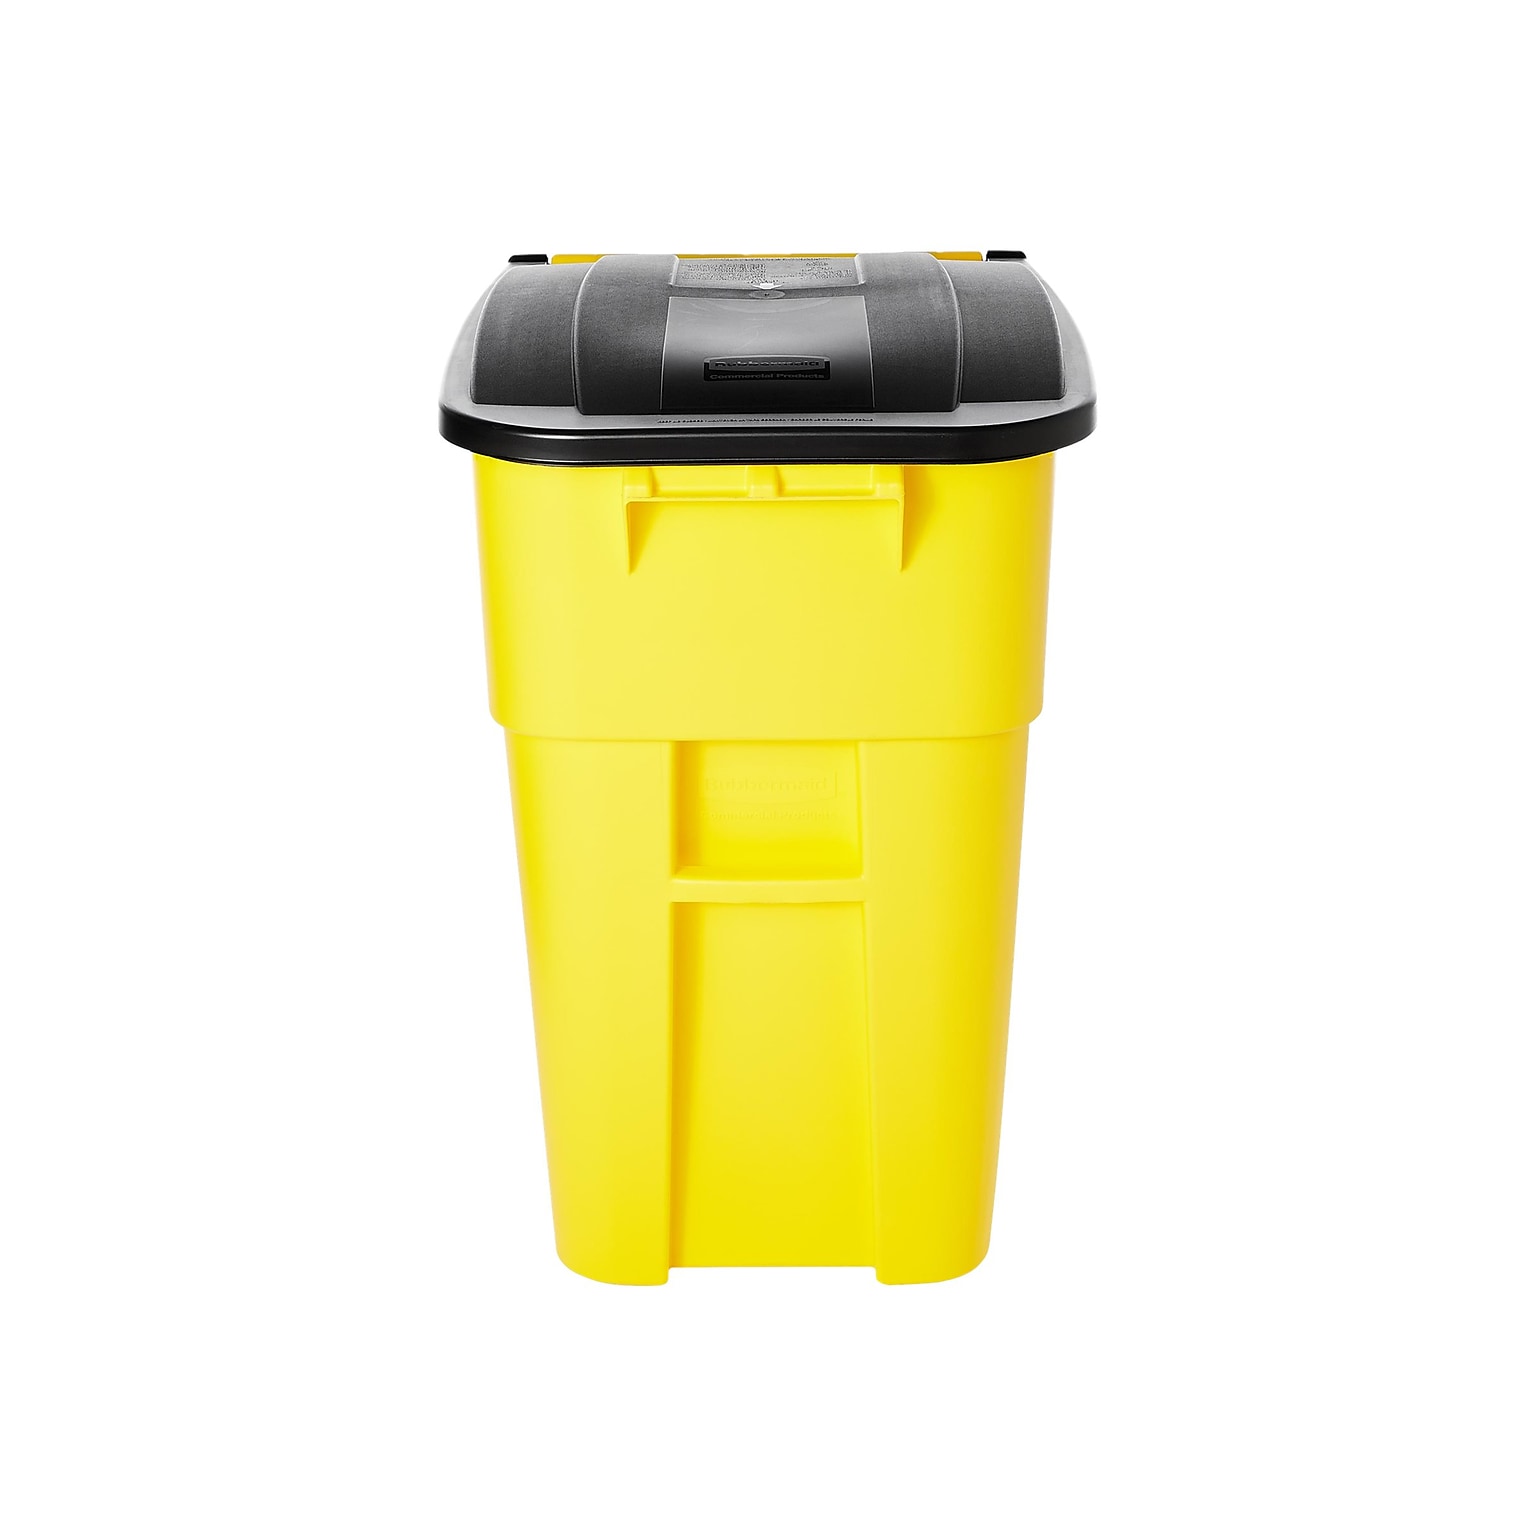 Rubbermaid BRUTE Rollout Plastic Outdoor Trash Can, 50 Gallon, Yellow (FG9W2700YEL)